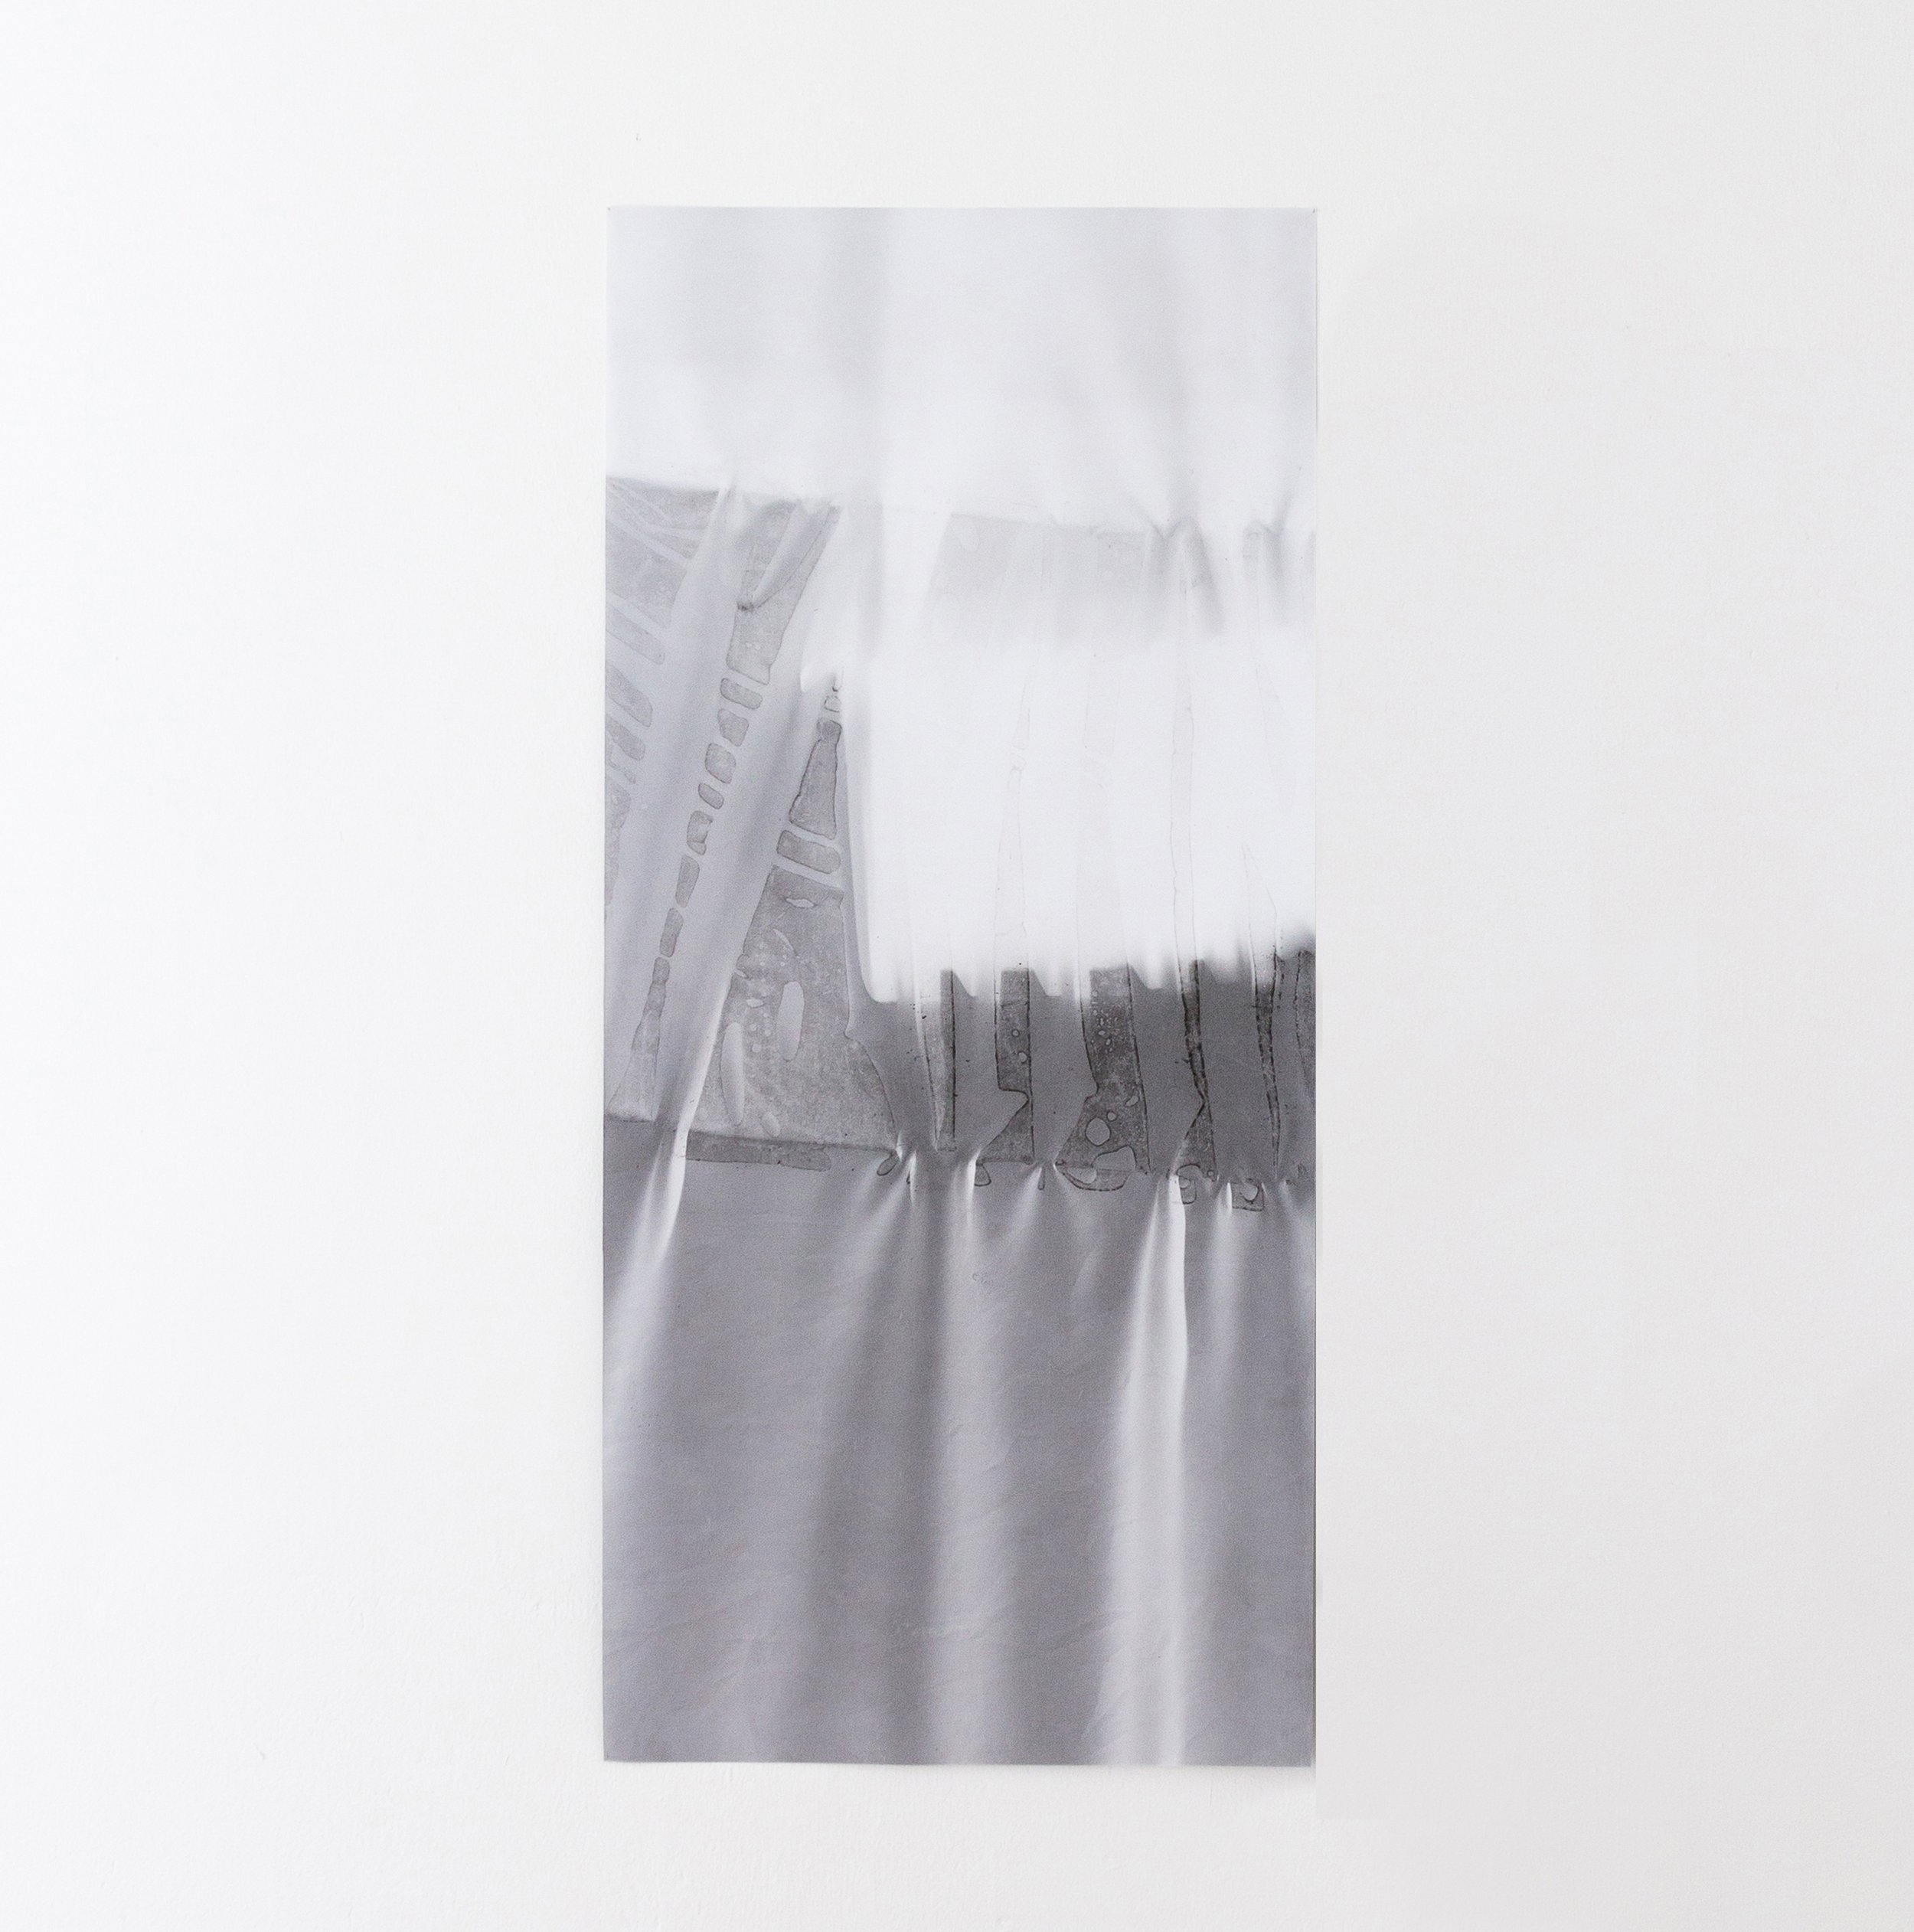  Martine Flor  Echoes From a Scene Il , 2021 spatial photograms on polyester, text 59 x 27 inches (150 x 68 cm) MF2 